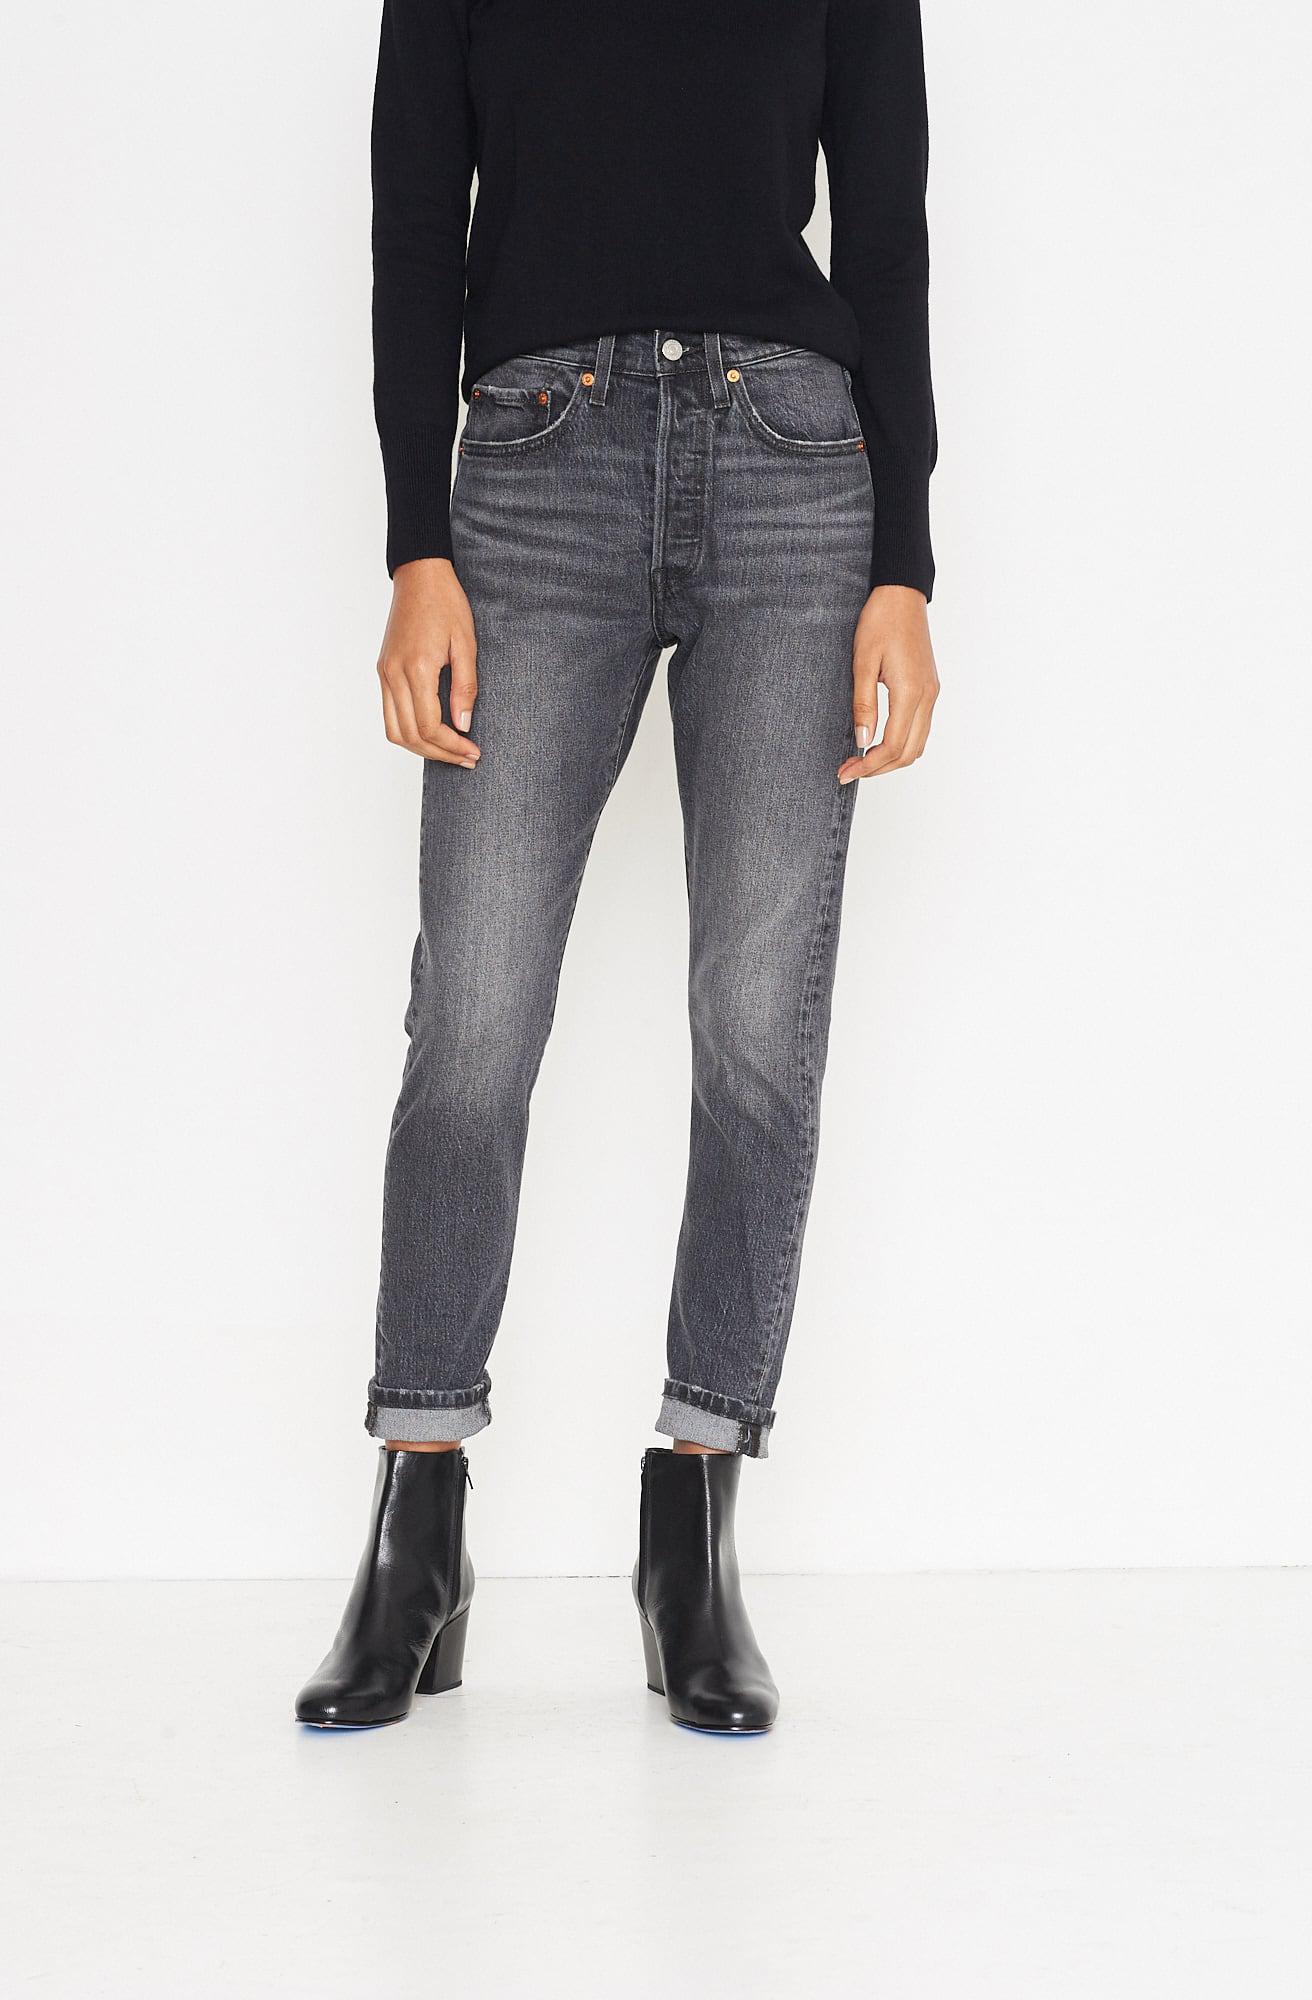 levi's 501 coal black Cheaper Than Retail Price> Buy Clothing, Accessories  and lifestyle products for women & men -